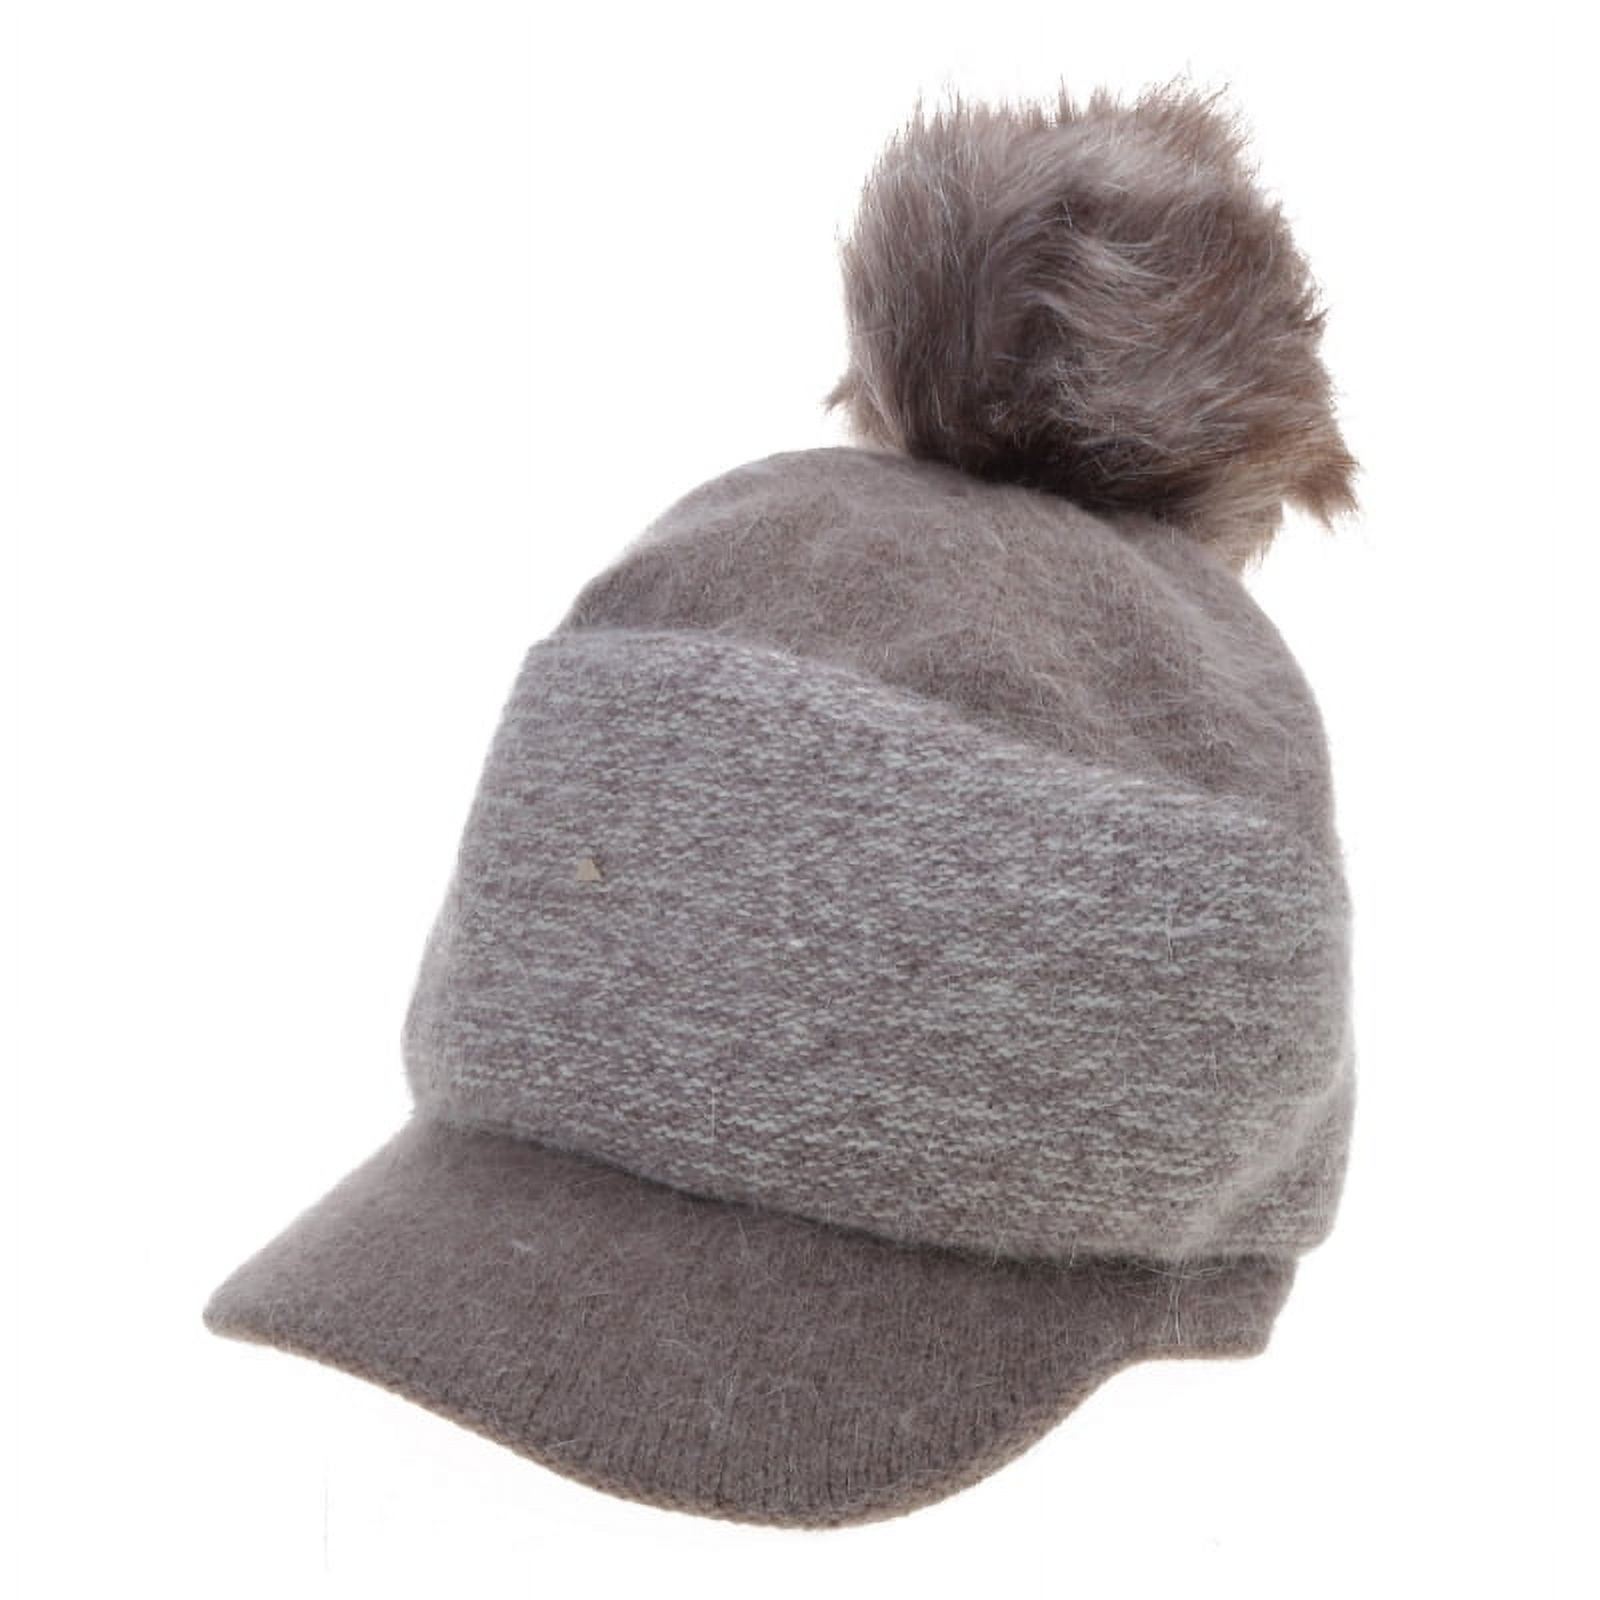 TINYSOME Baseball Cap Outdoor Sports Knitted Fuzzy Warm Pompom